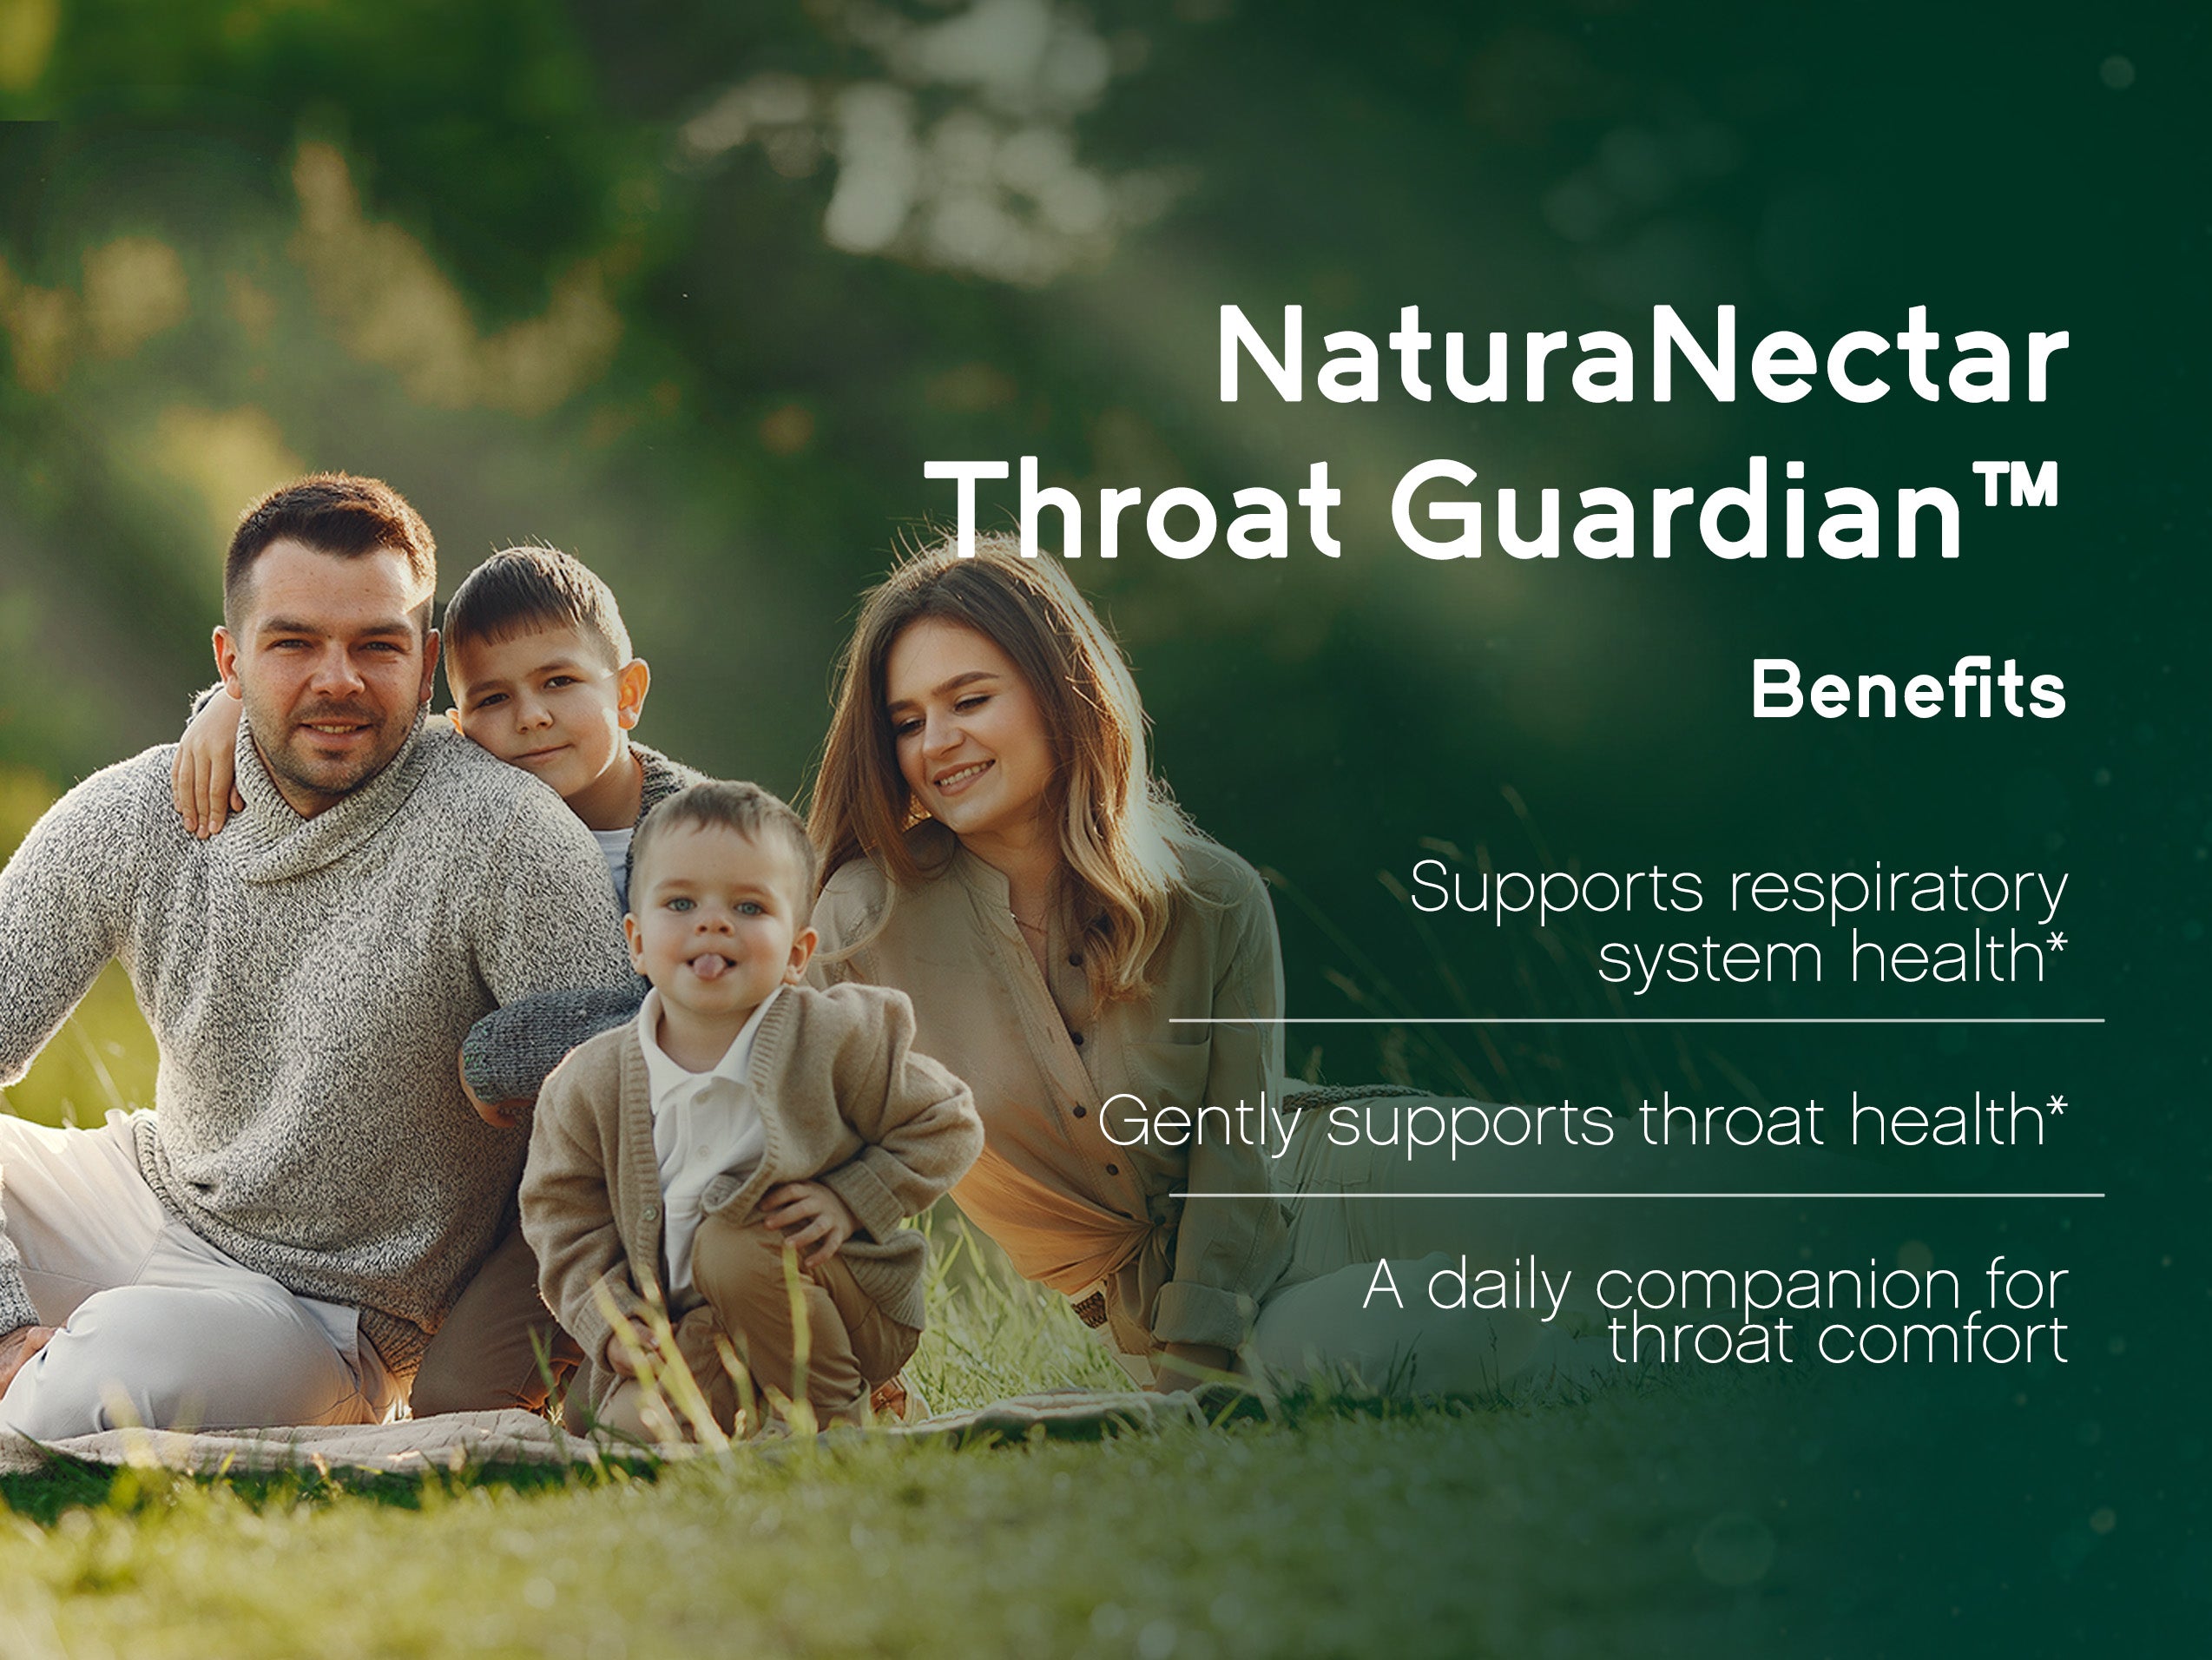 Throat Guardian Spray – Propolis organic aromatic acids to support throat health*, immune health*, and alleviate the effects of a raspy voice